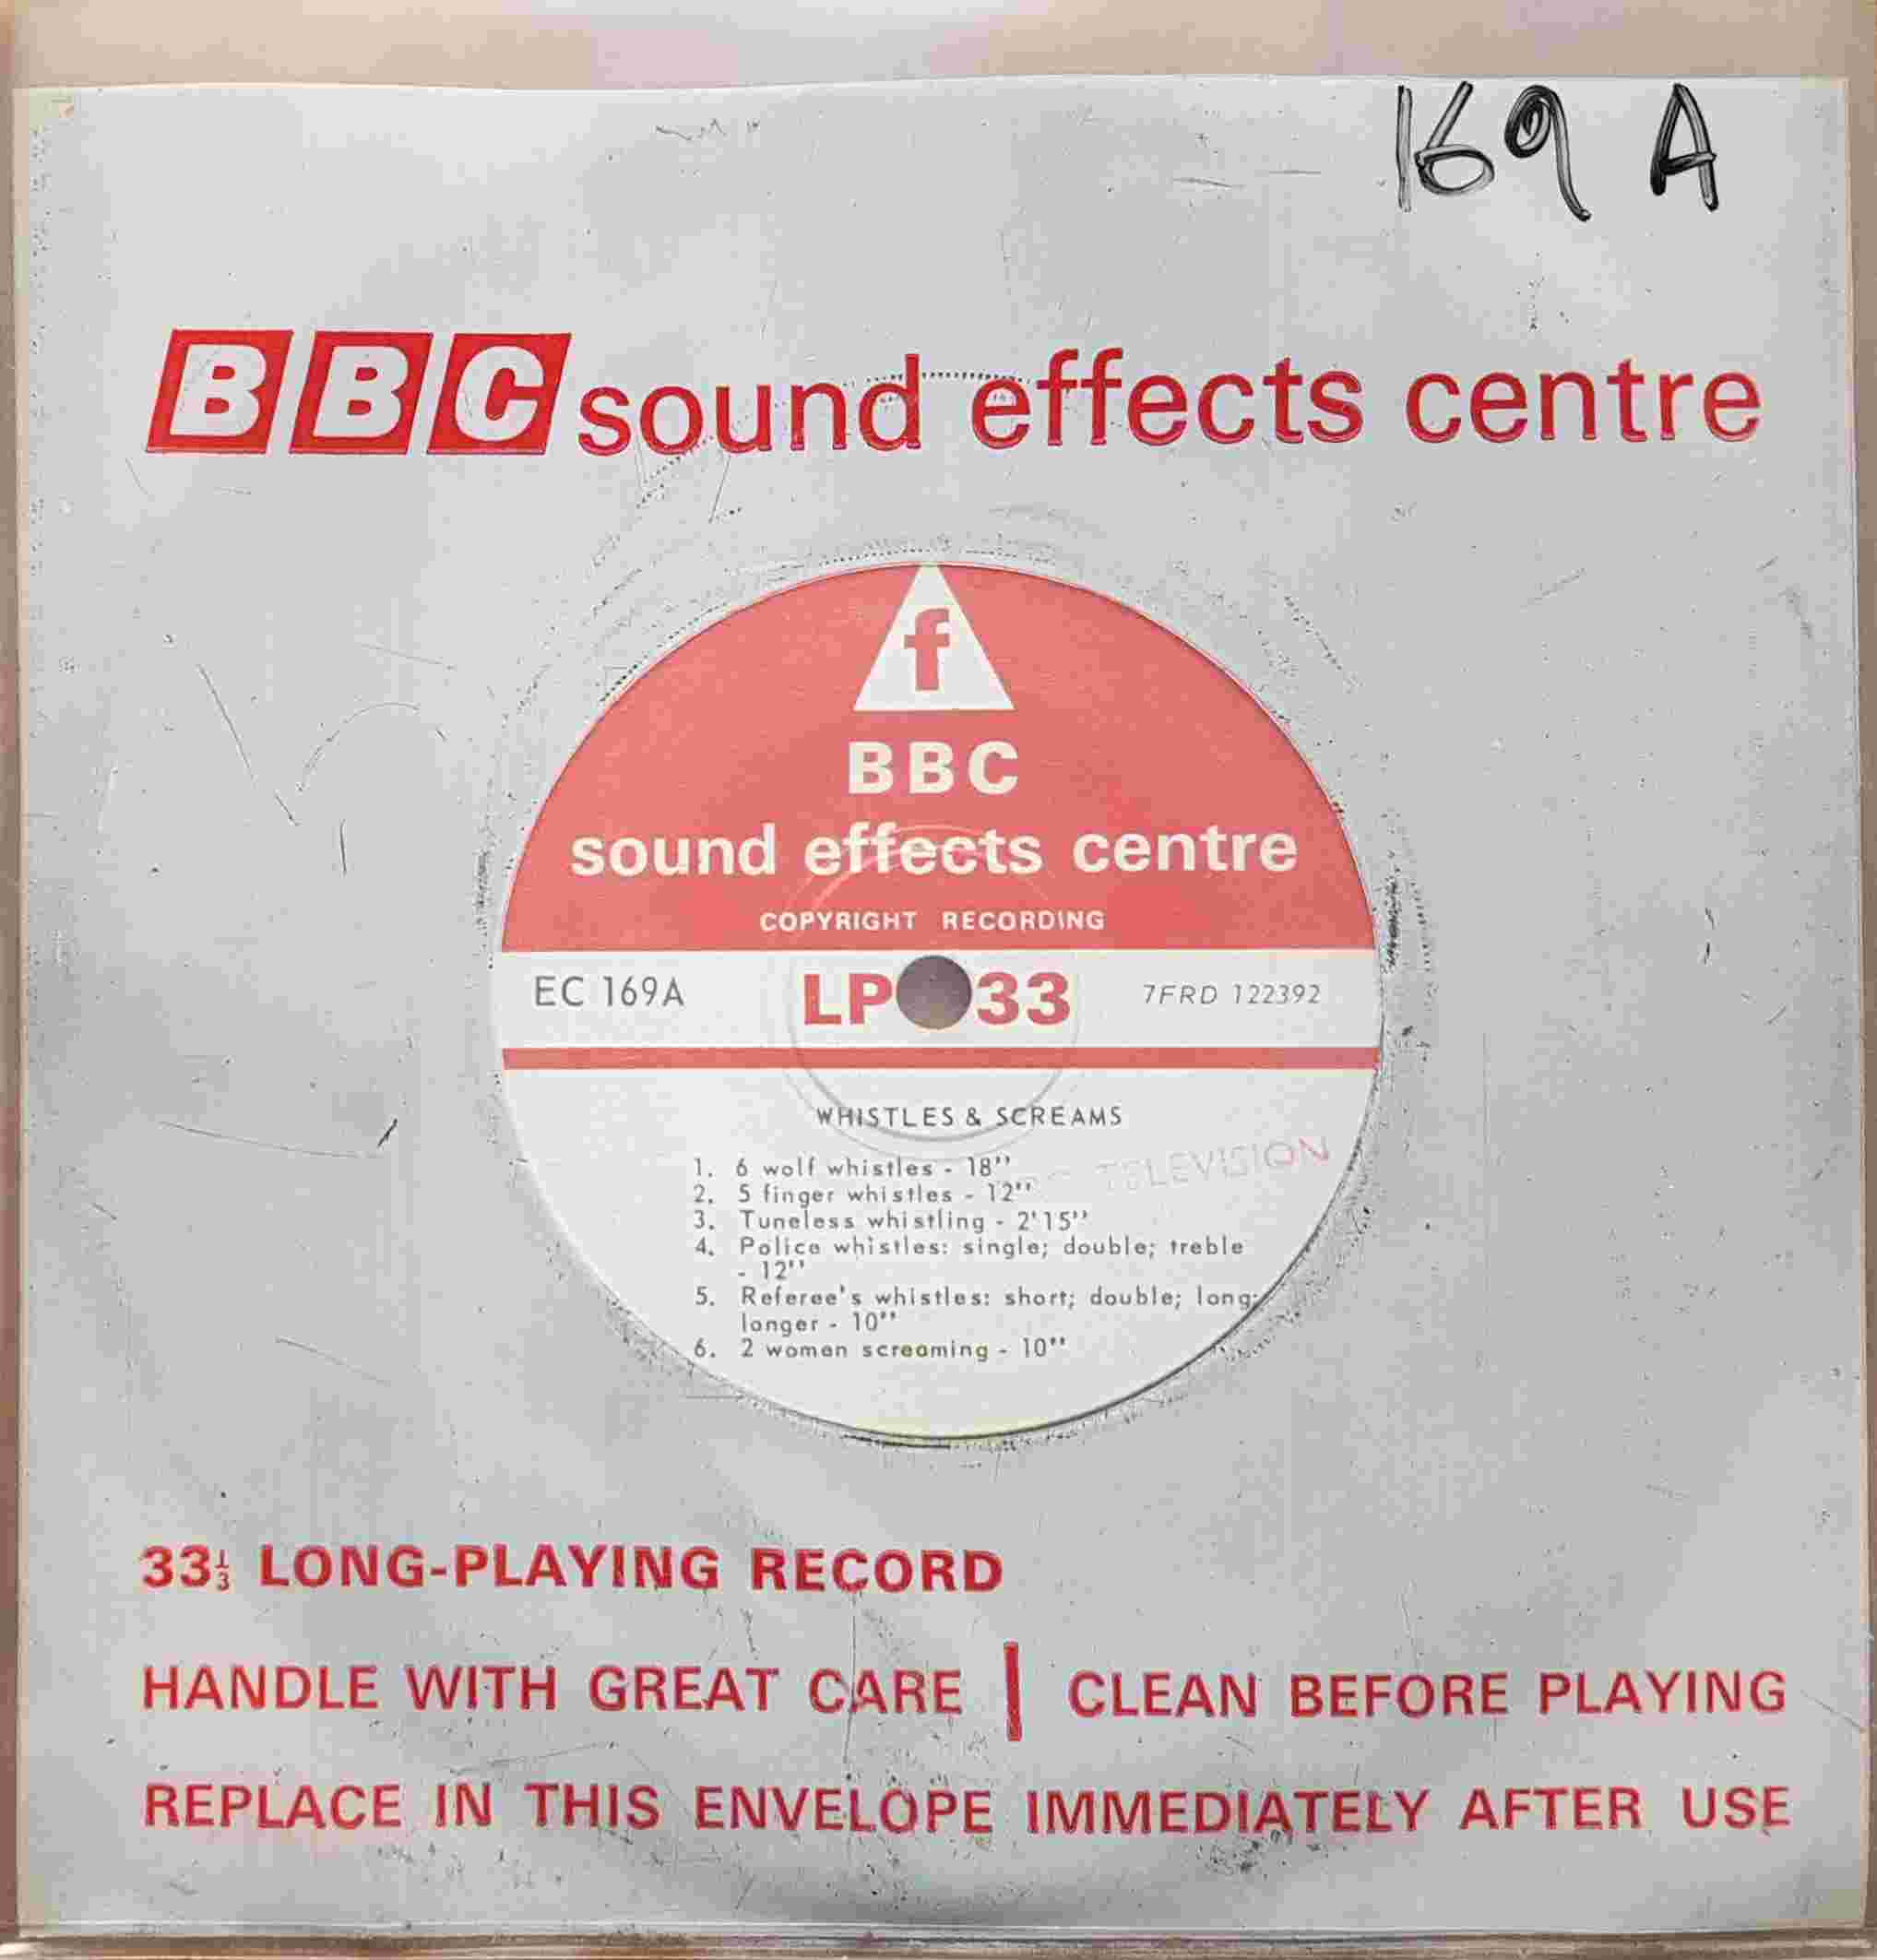 Picture of EC 169A Screams by artist Not registered from the BBC singles - Records and Tapes library